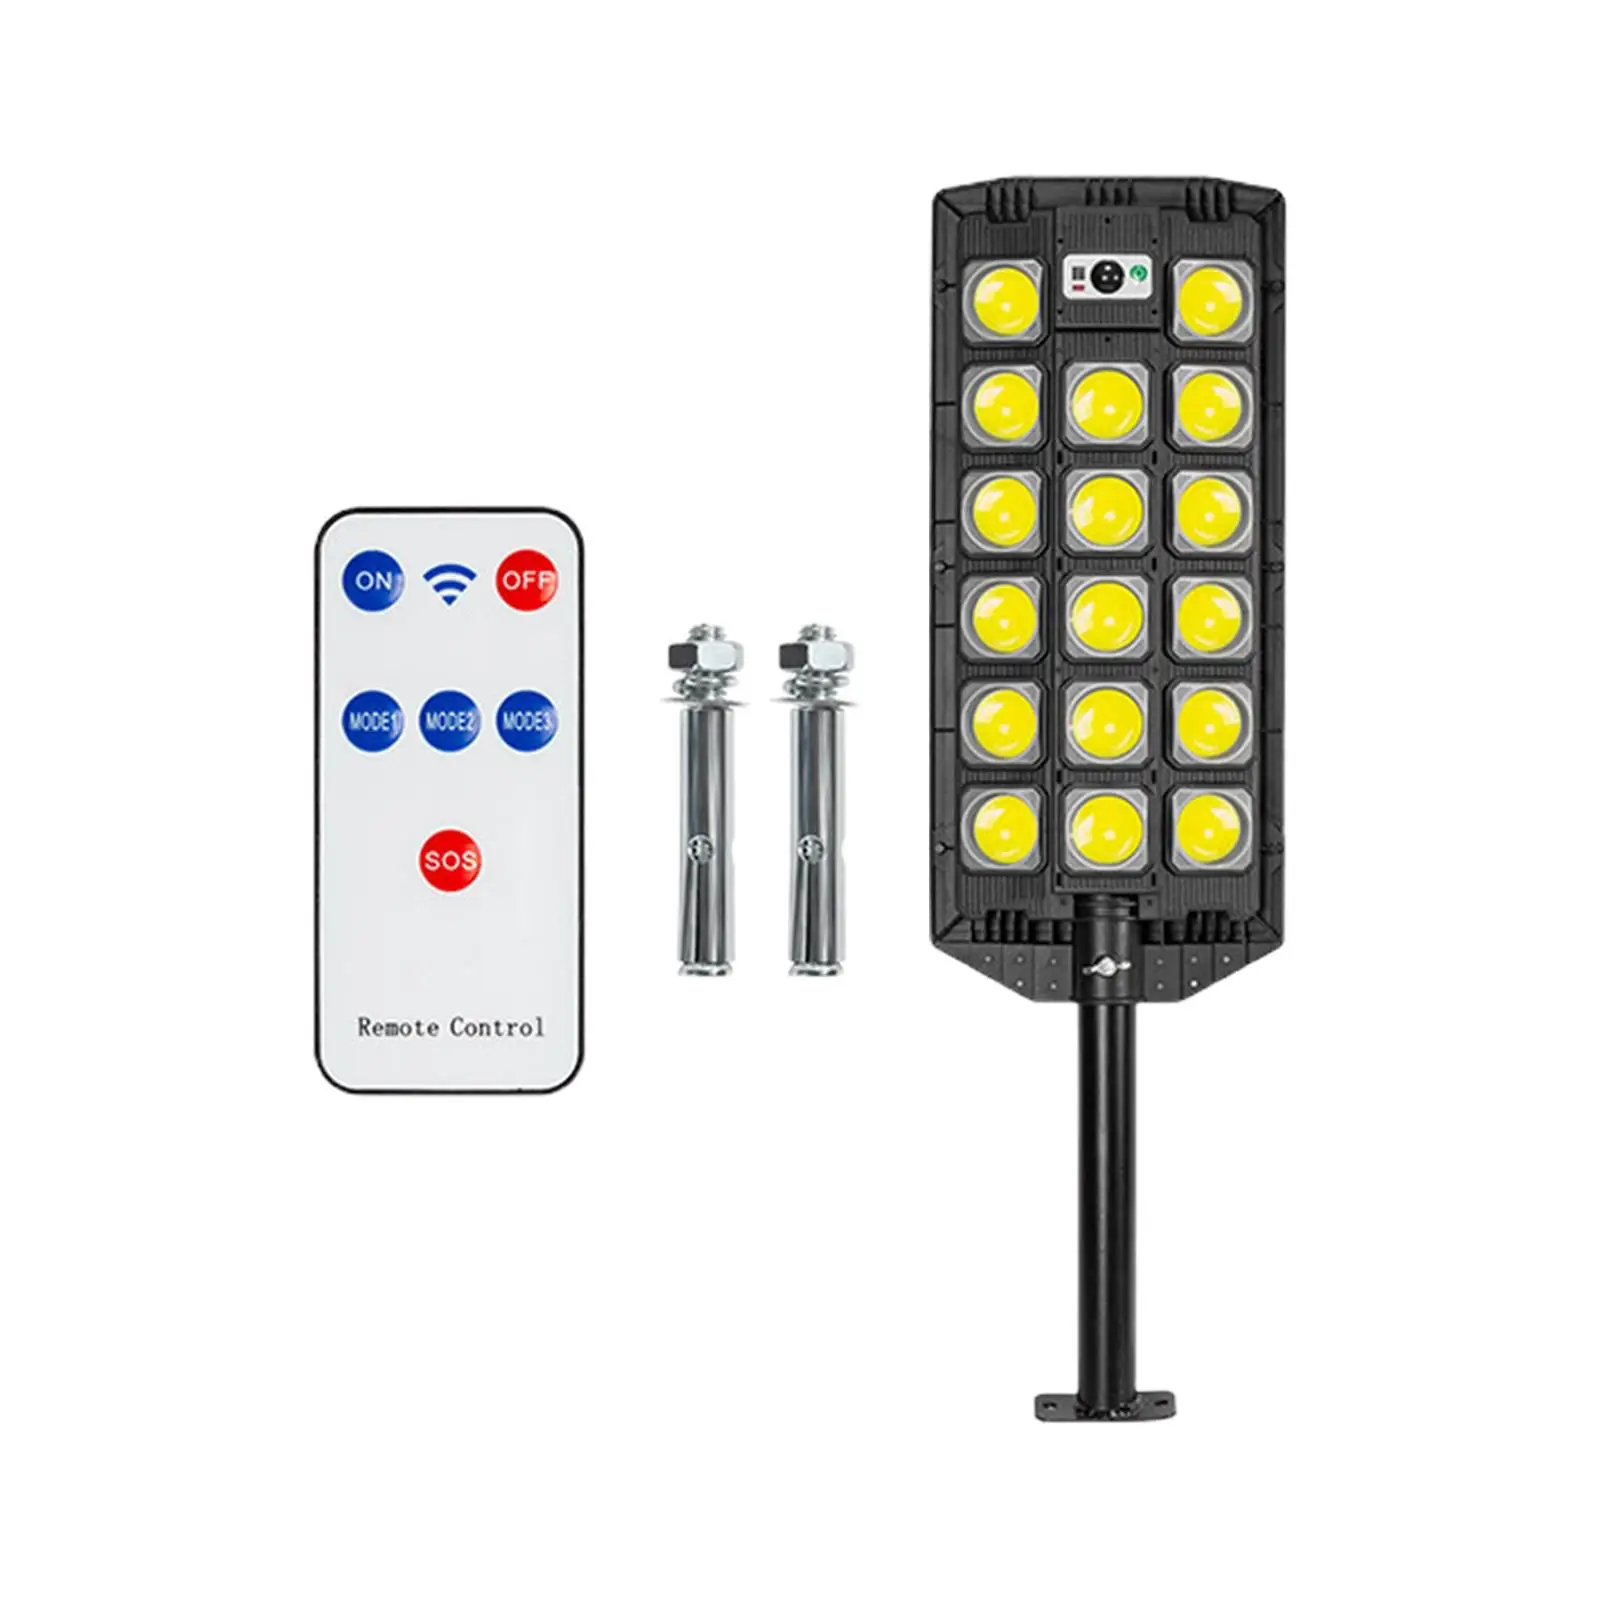 Outdoor Street Light Outdoor Flood Lighting with Remote Control Adjustable Solar Lamp for Landscape Driveways Patio Barn Wall